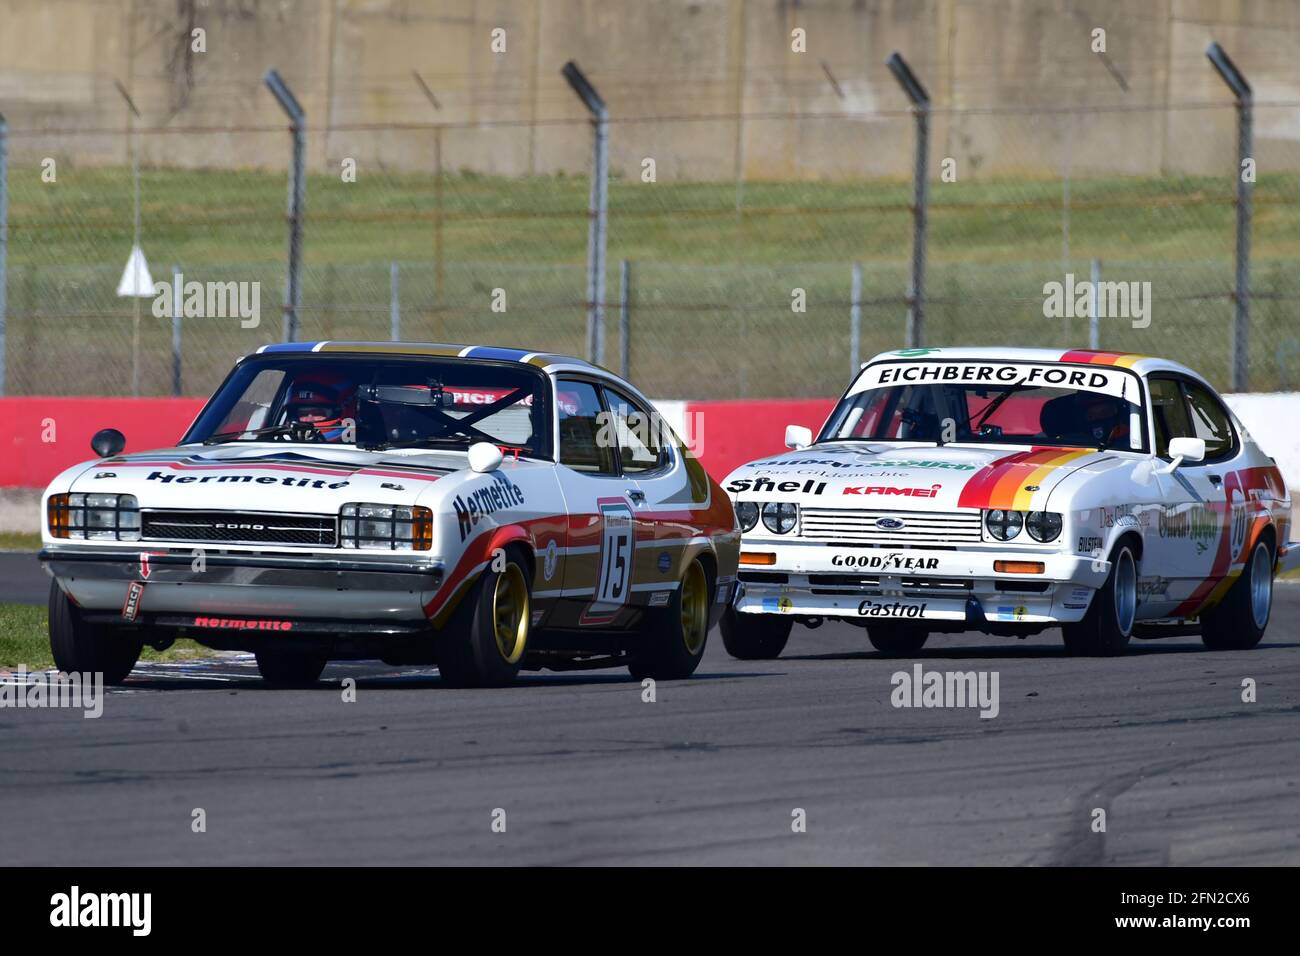 A pair of Capri's at the exit of McLeans, John Spiers, Tiff Needell, Ford Capri, Marcus Jewell, Ben Clucas, Ford Capri, Historic Touring Car Challenge Stock Photo